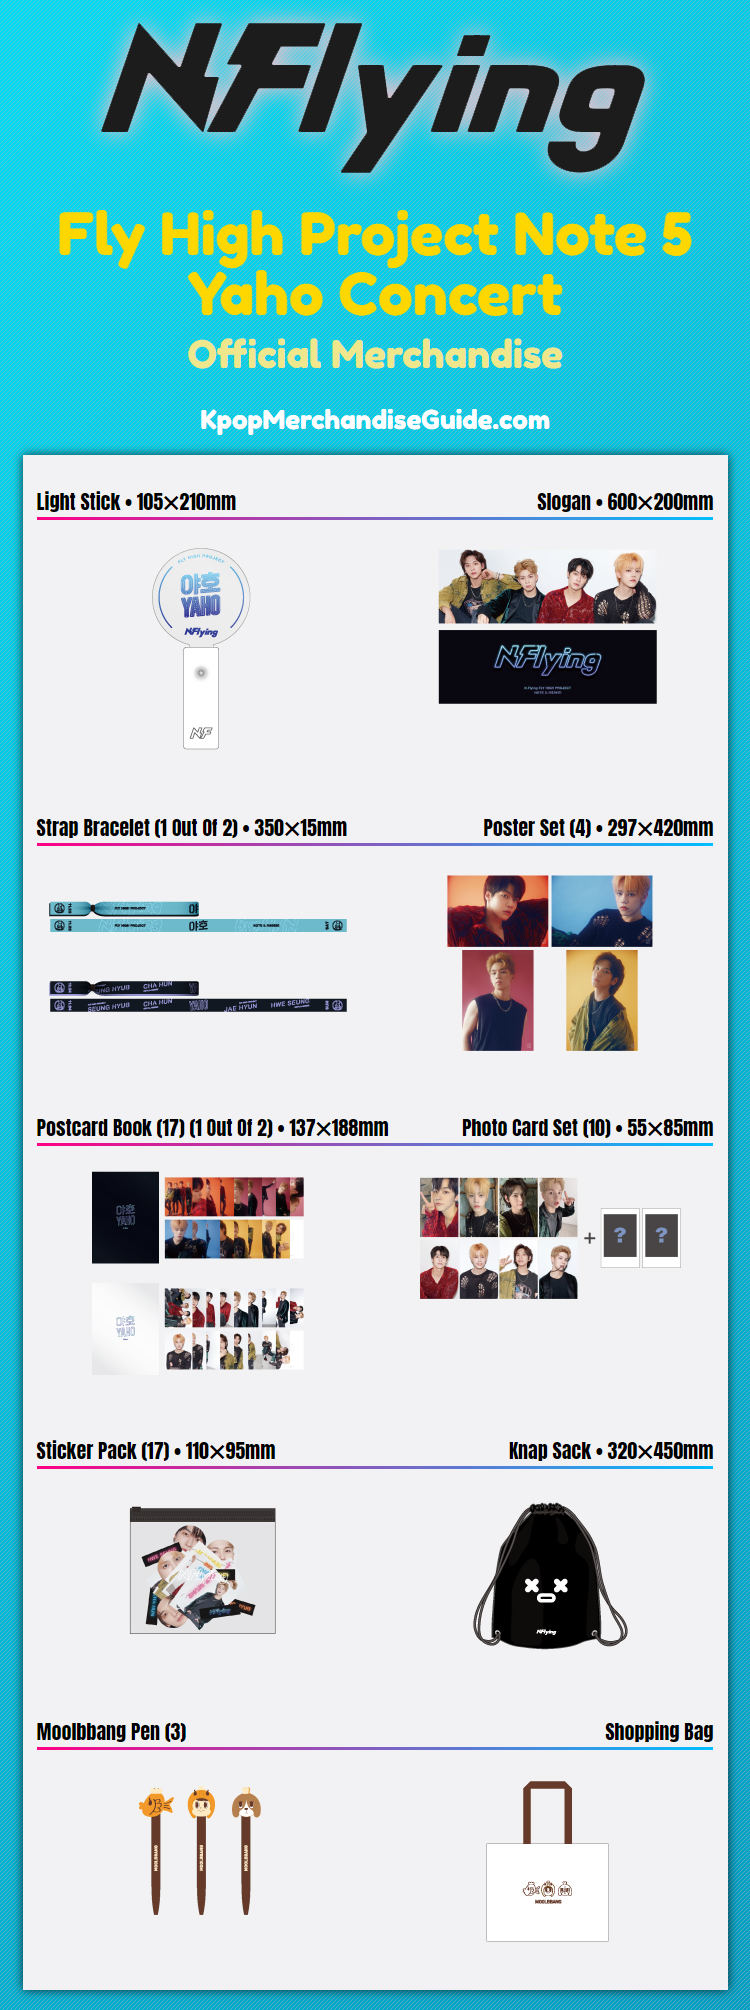 N.Flying Fly High Project Note 5 Yaho Concert Merchandise